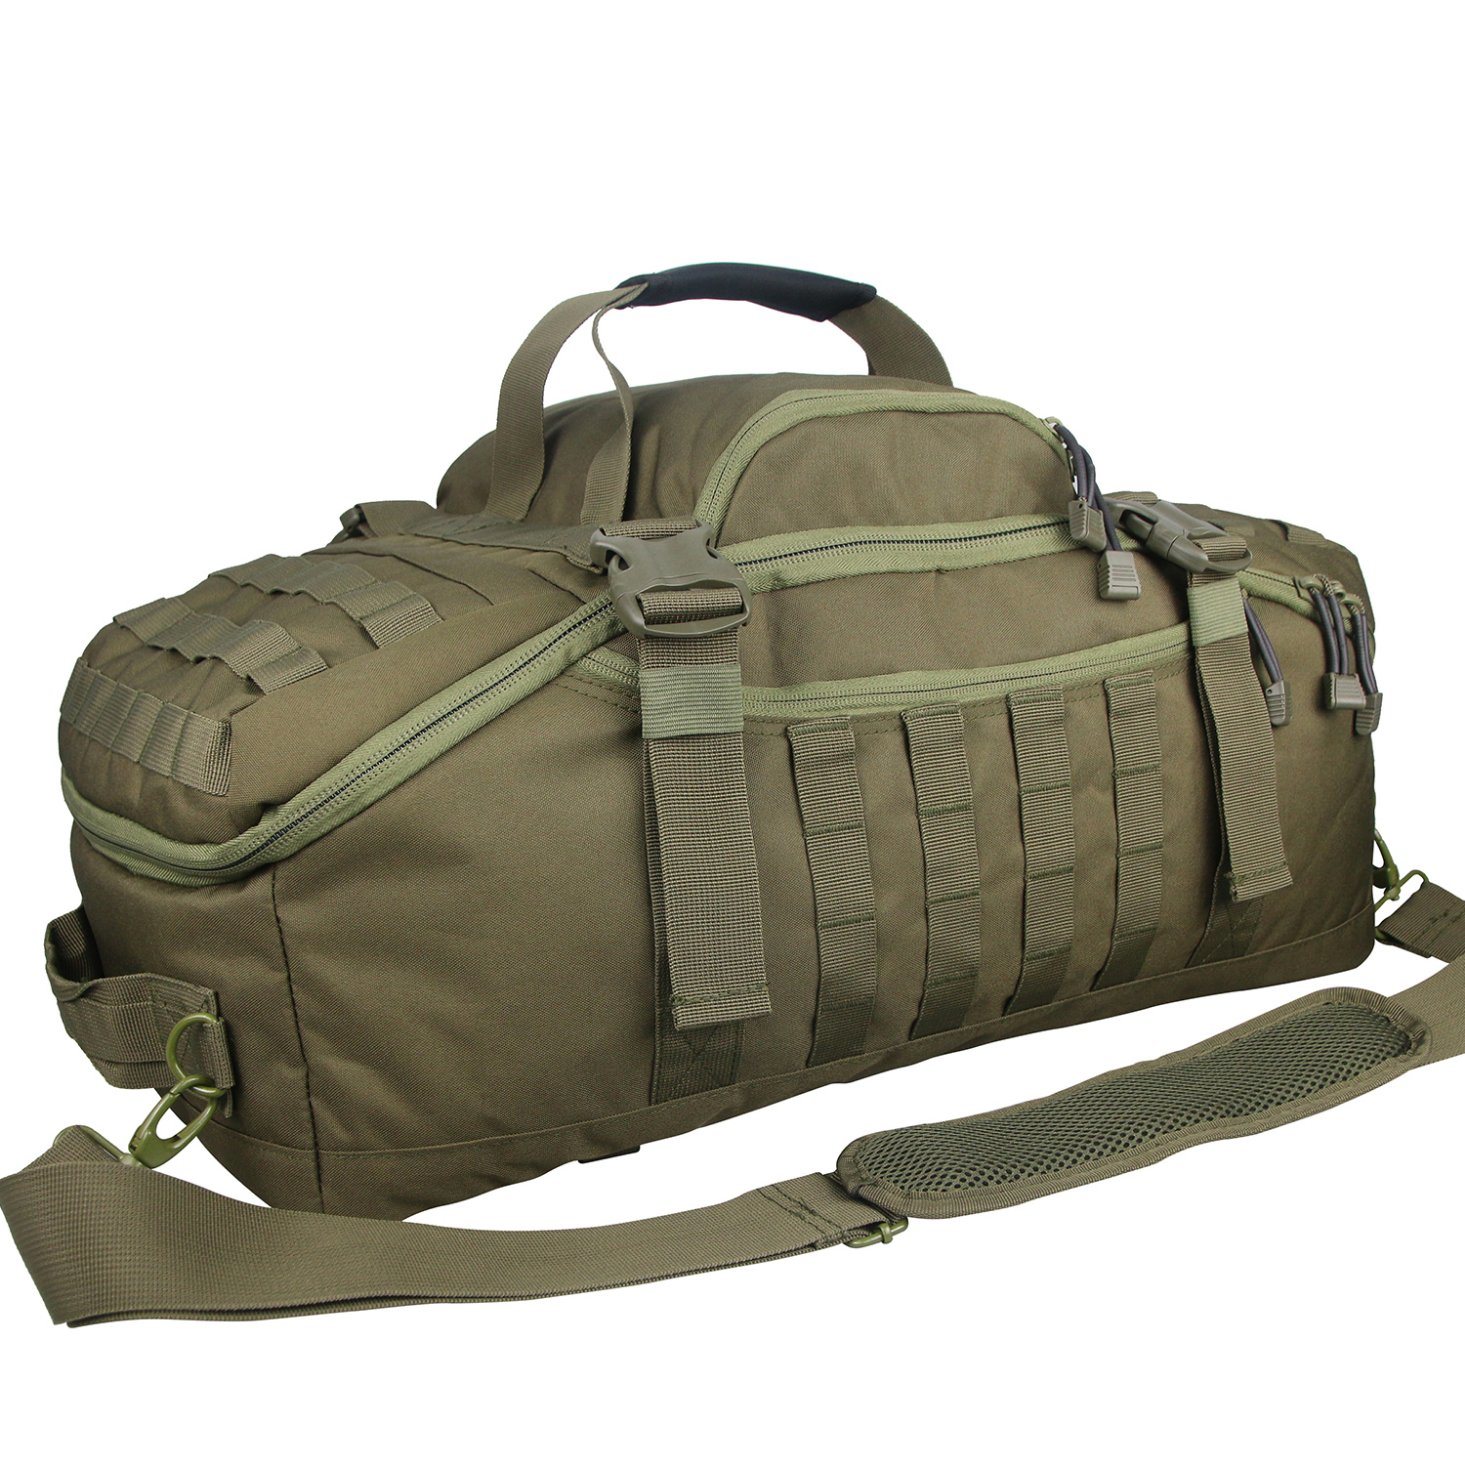 Tactical Military Duffel Backpack with Shoulder Strap Travel Hunting Mountain Outdoor Sports Luggage Bag